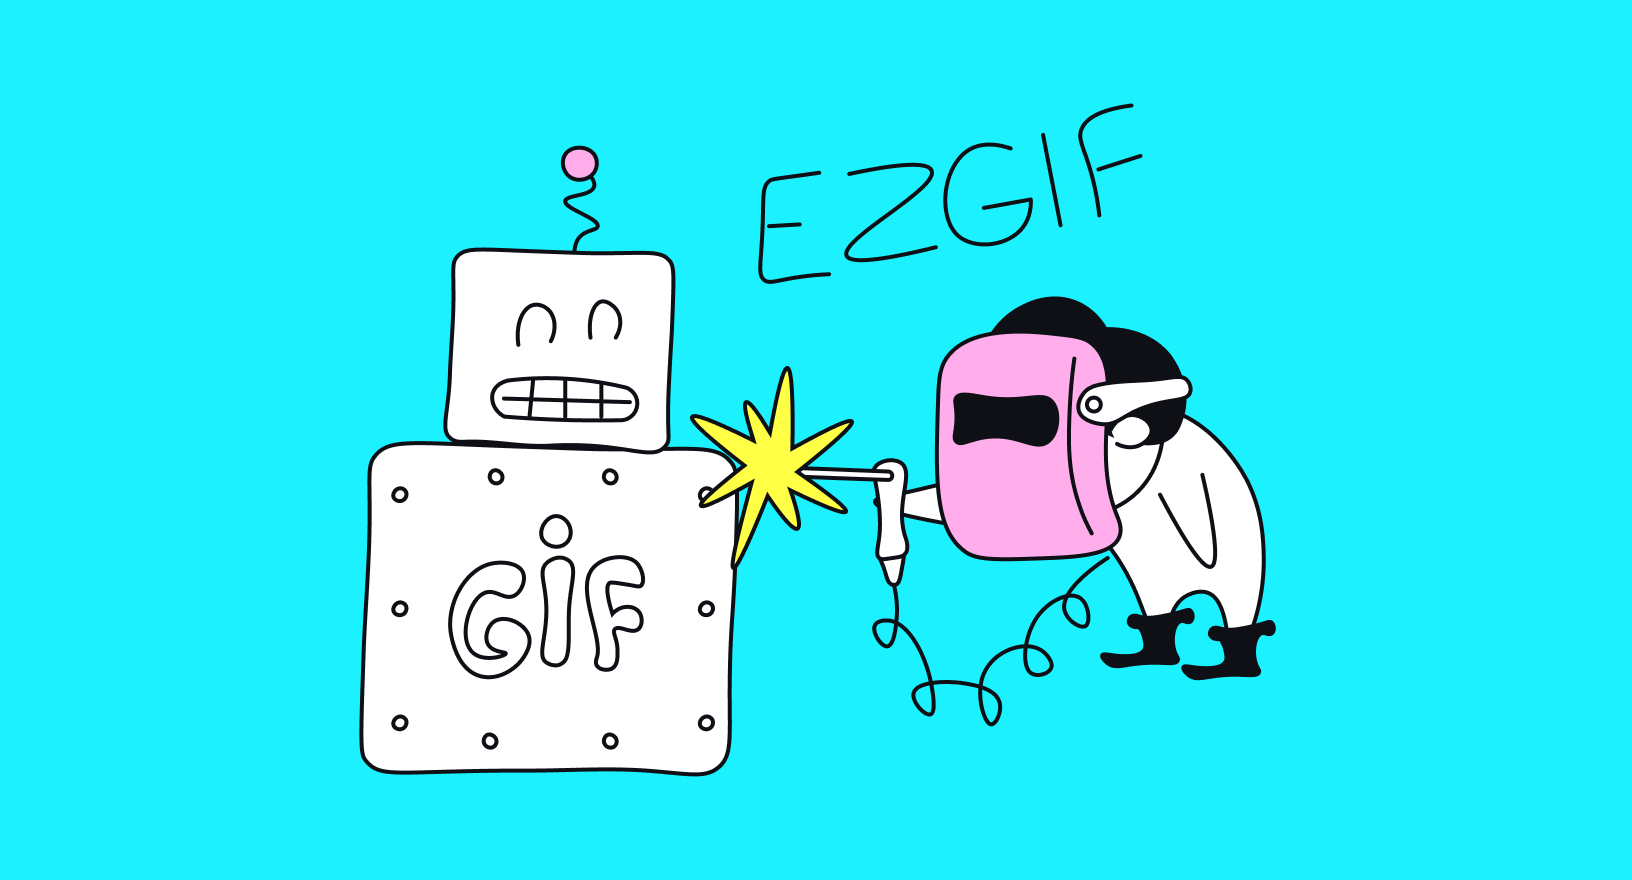 How to Make a GIF in Photoshop, GIPHY, Ezgif, and More